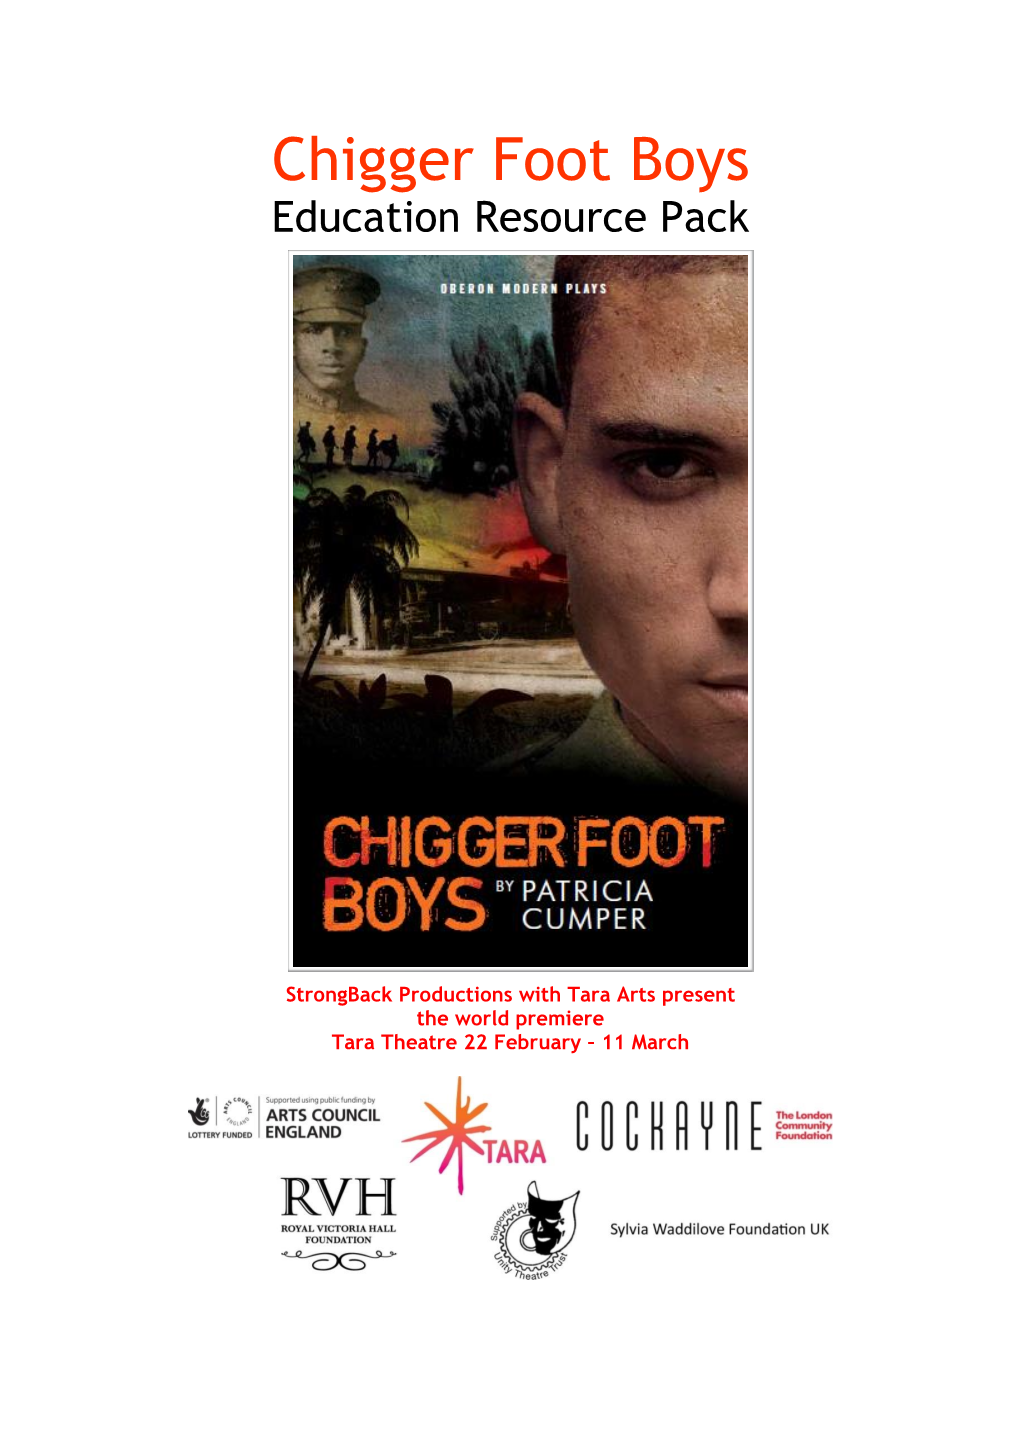 Chigger Foot Boys Education Resource Pack